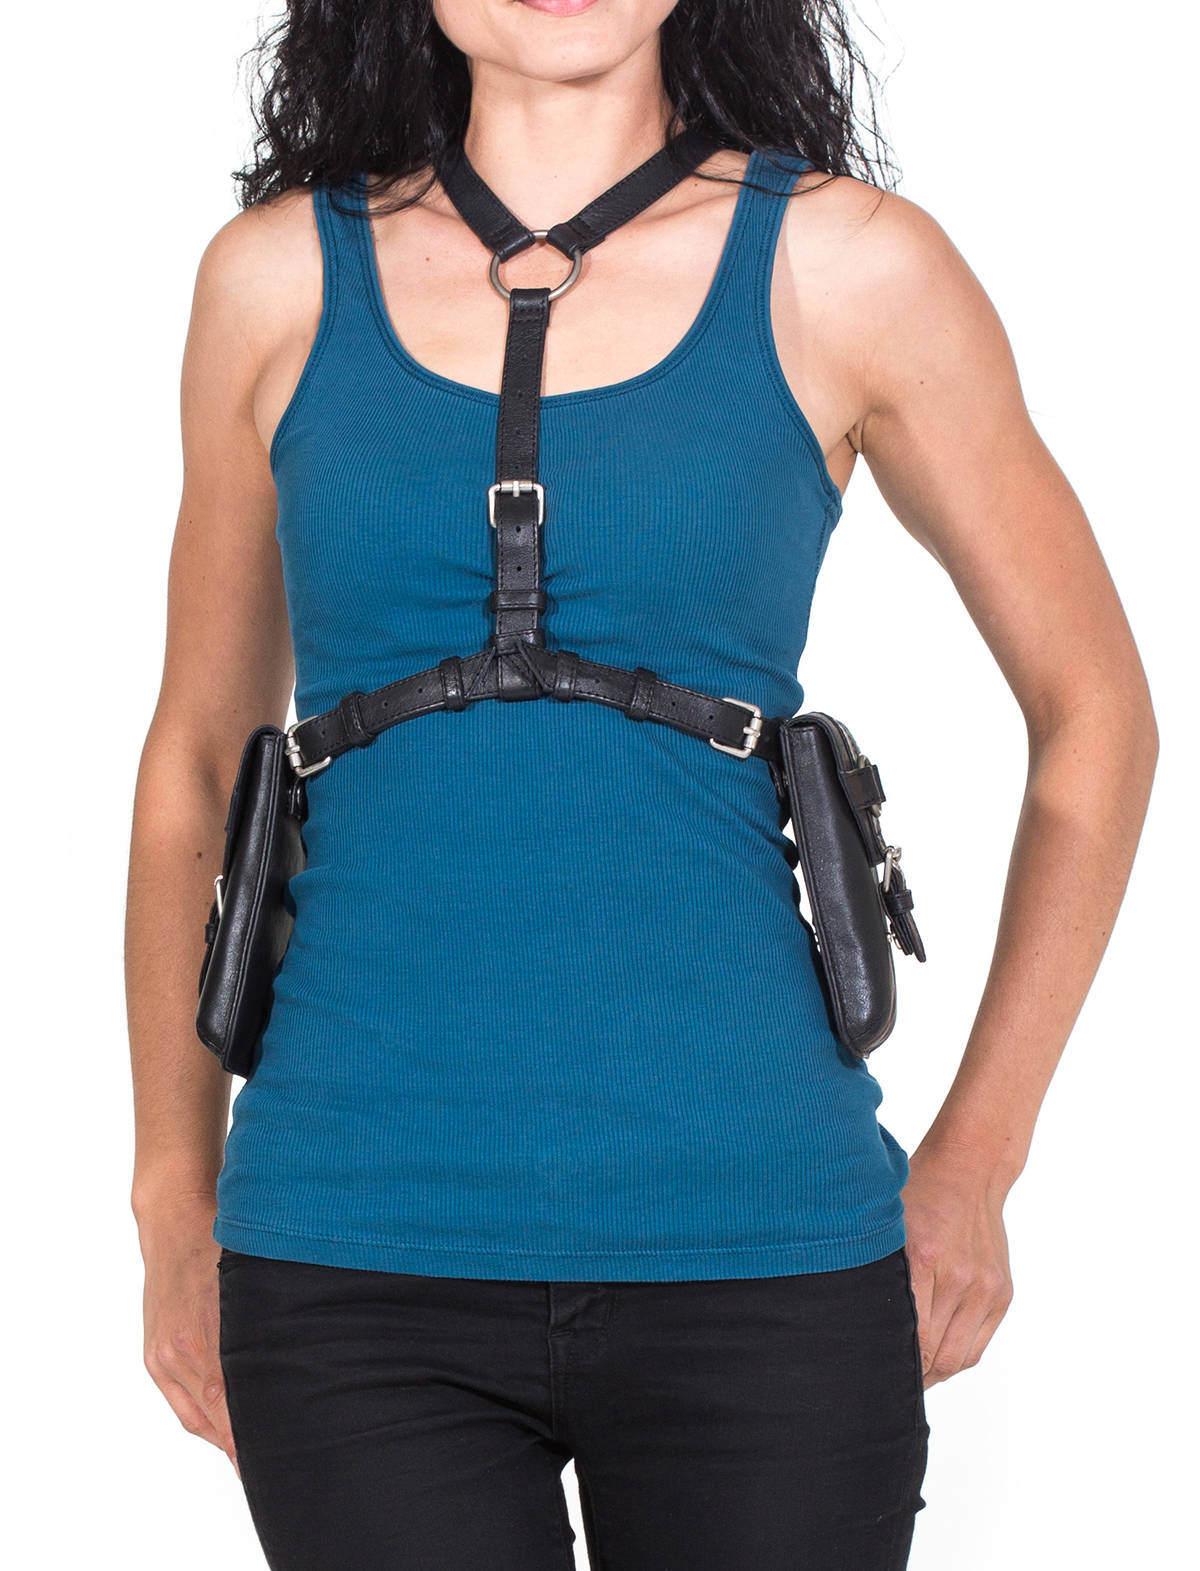 Dark Blue Leather Cage Bra, Genuine Leather Chest Harness, Leather